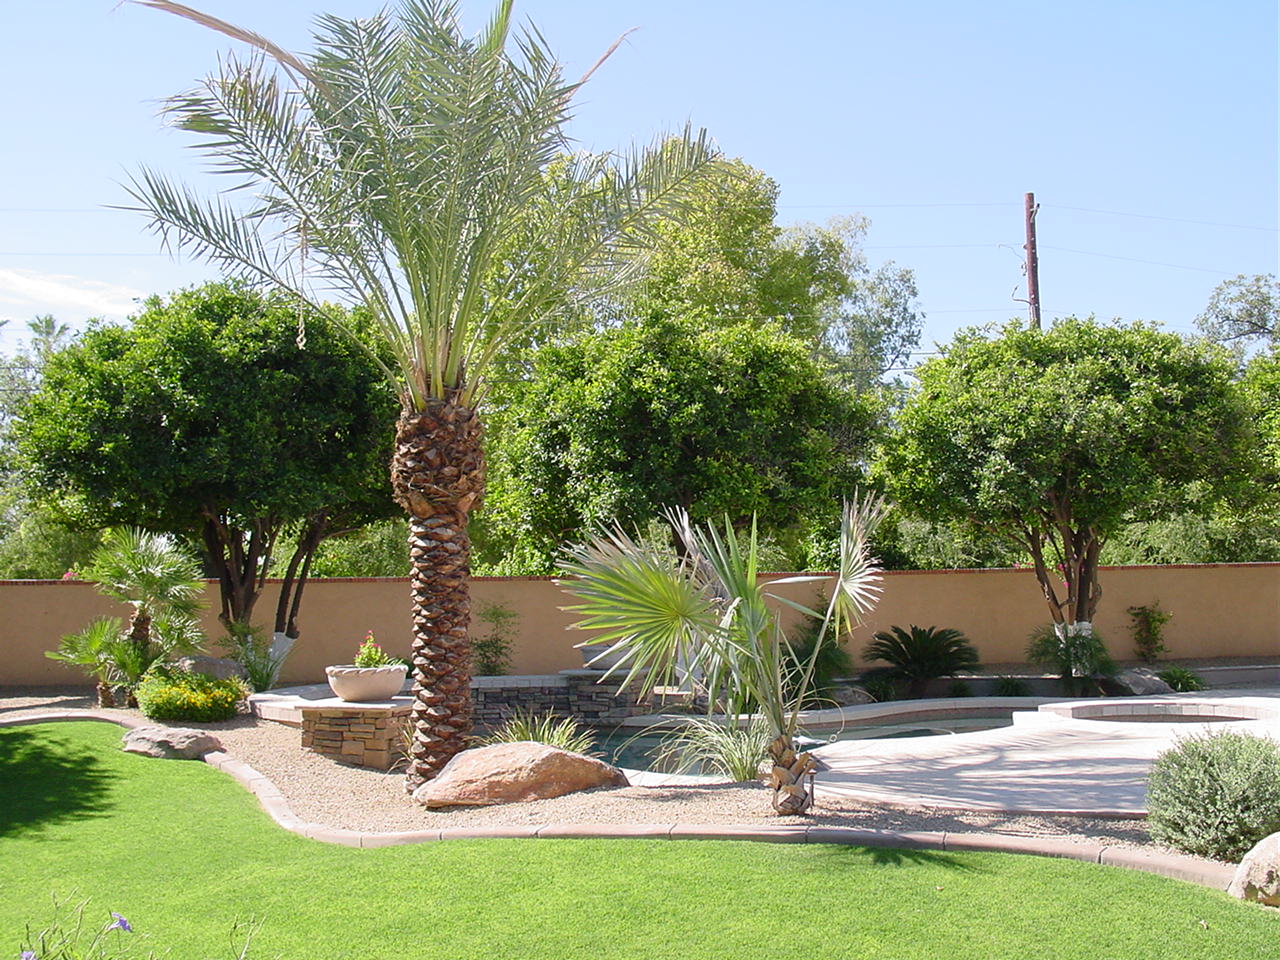  Here lot info: Pools and landscaping ideas evergreens for privacy